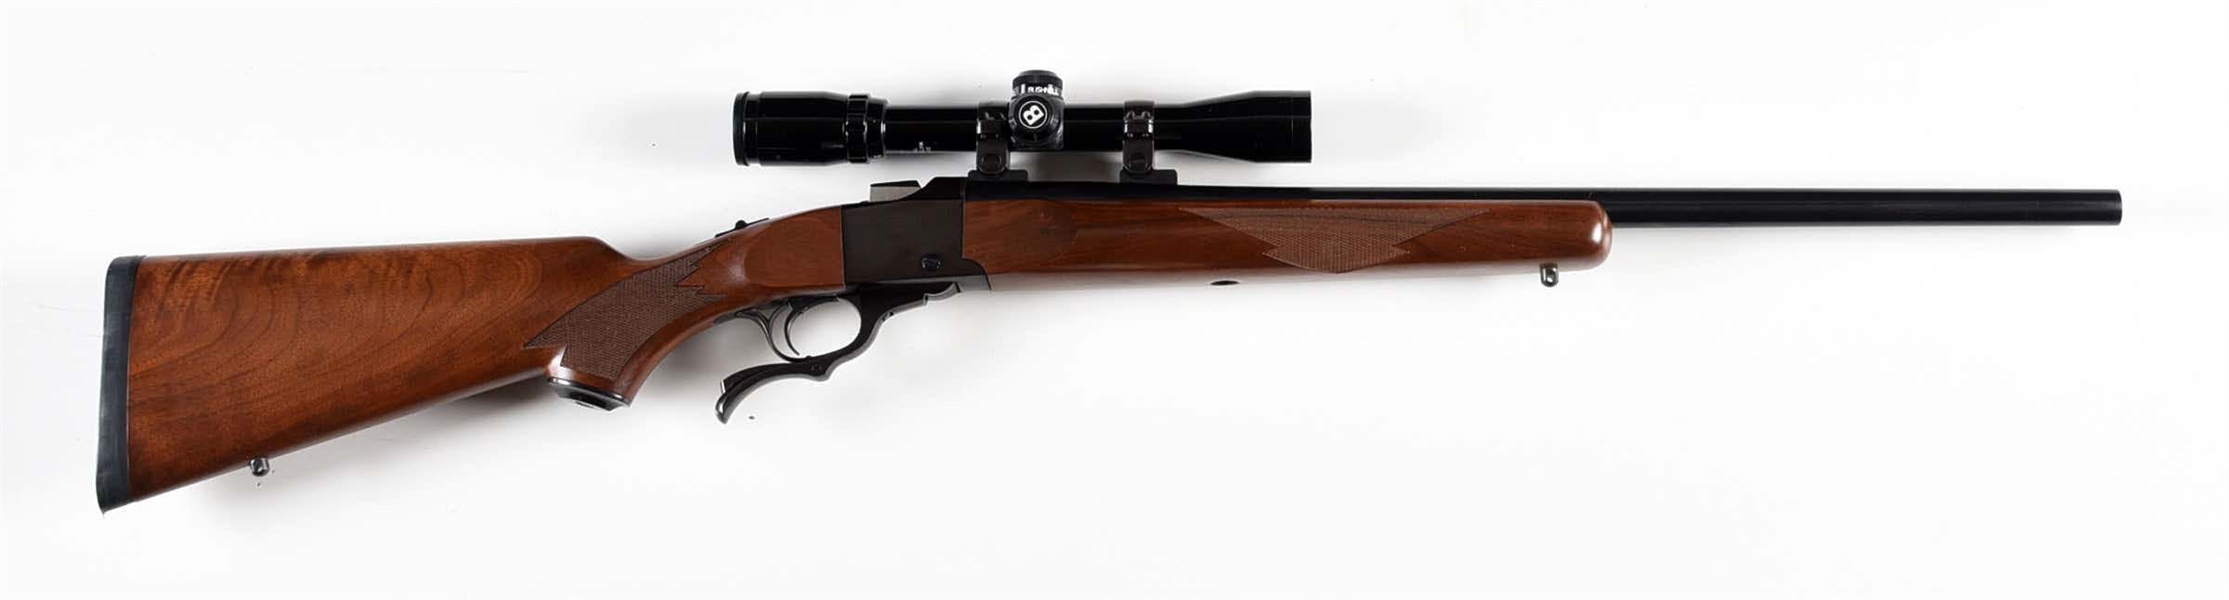 (M) RUGER NO. 1 SINGLE SHOT RIFLE IN .22-250.